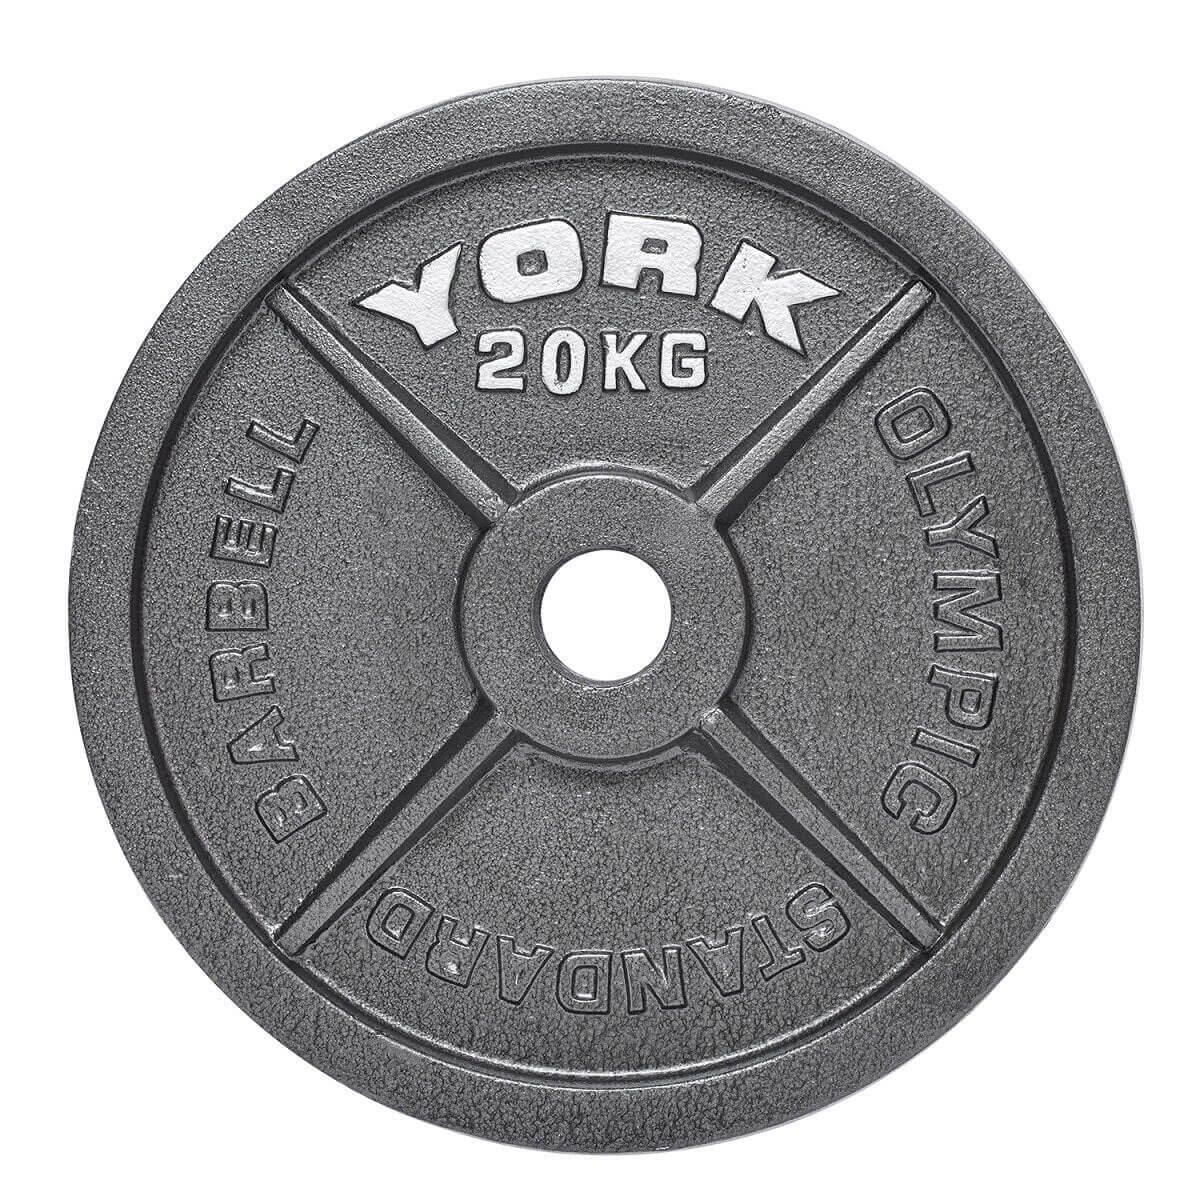 YORK York Olympic Cast Iron Weight Plate 1 x 20kg